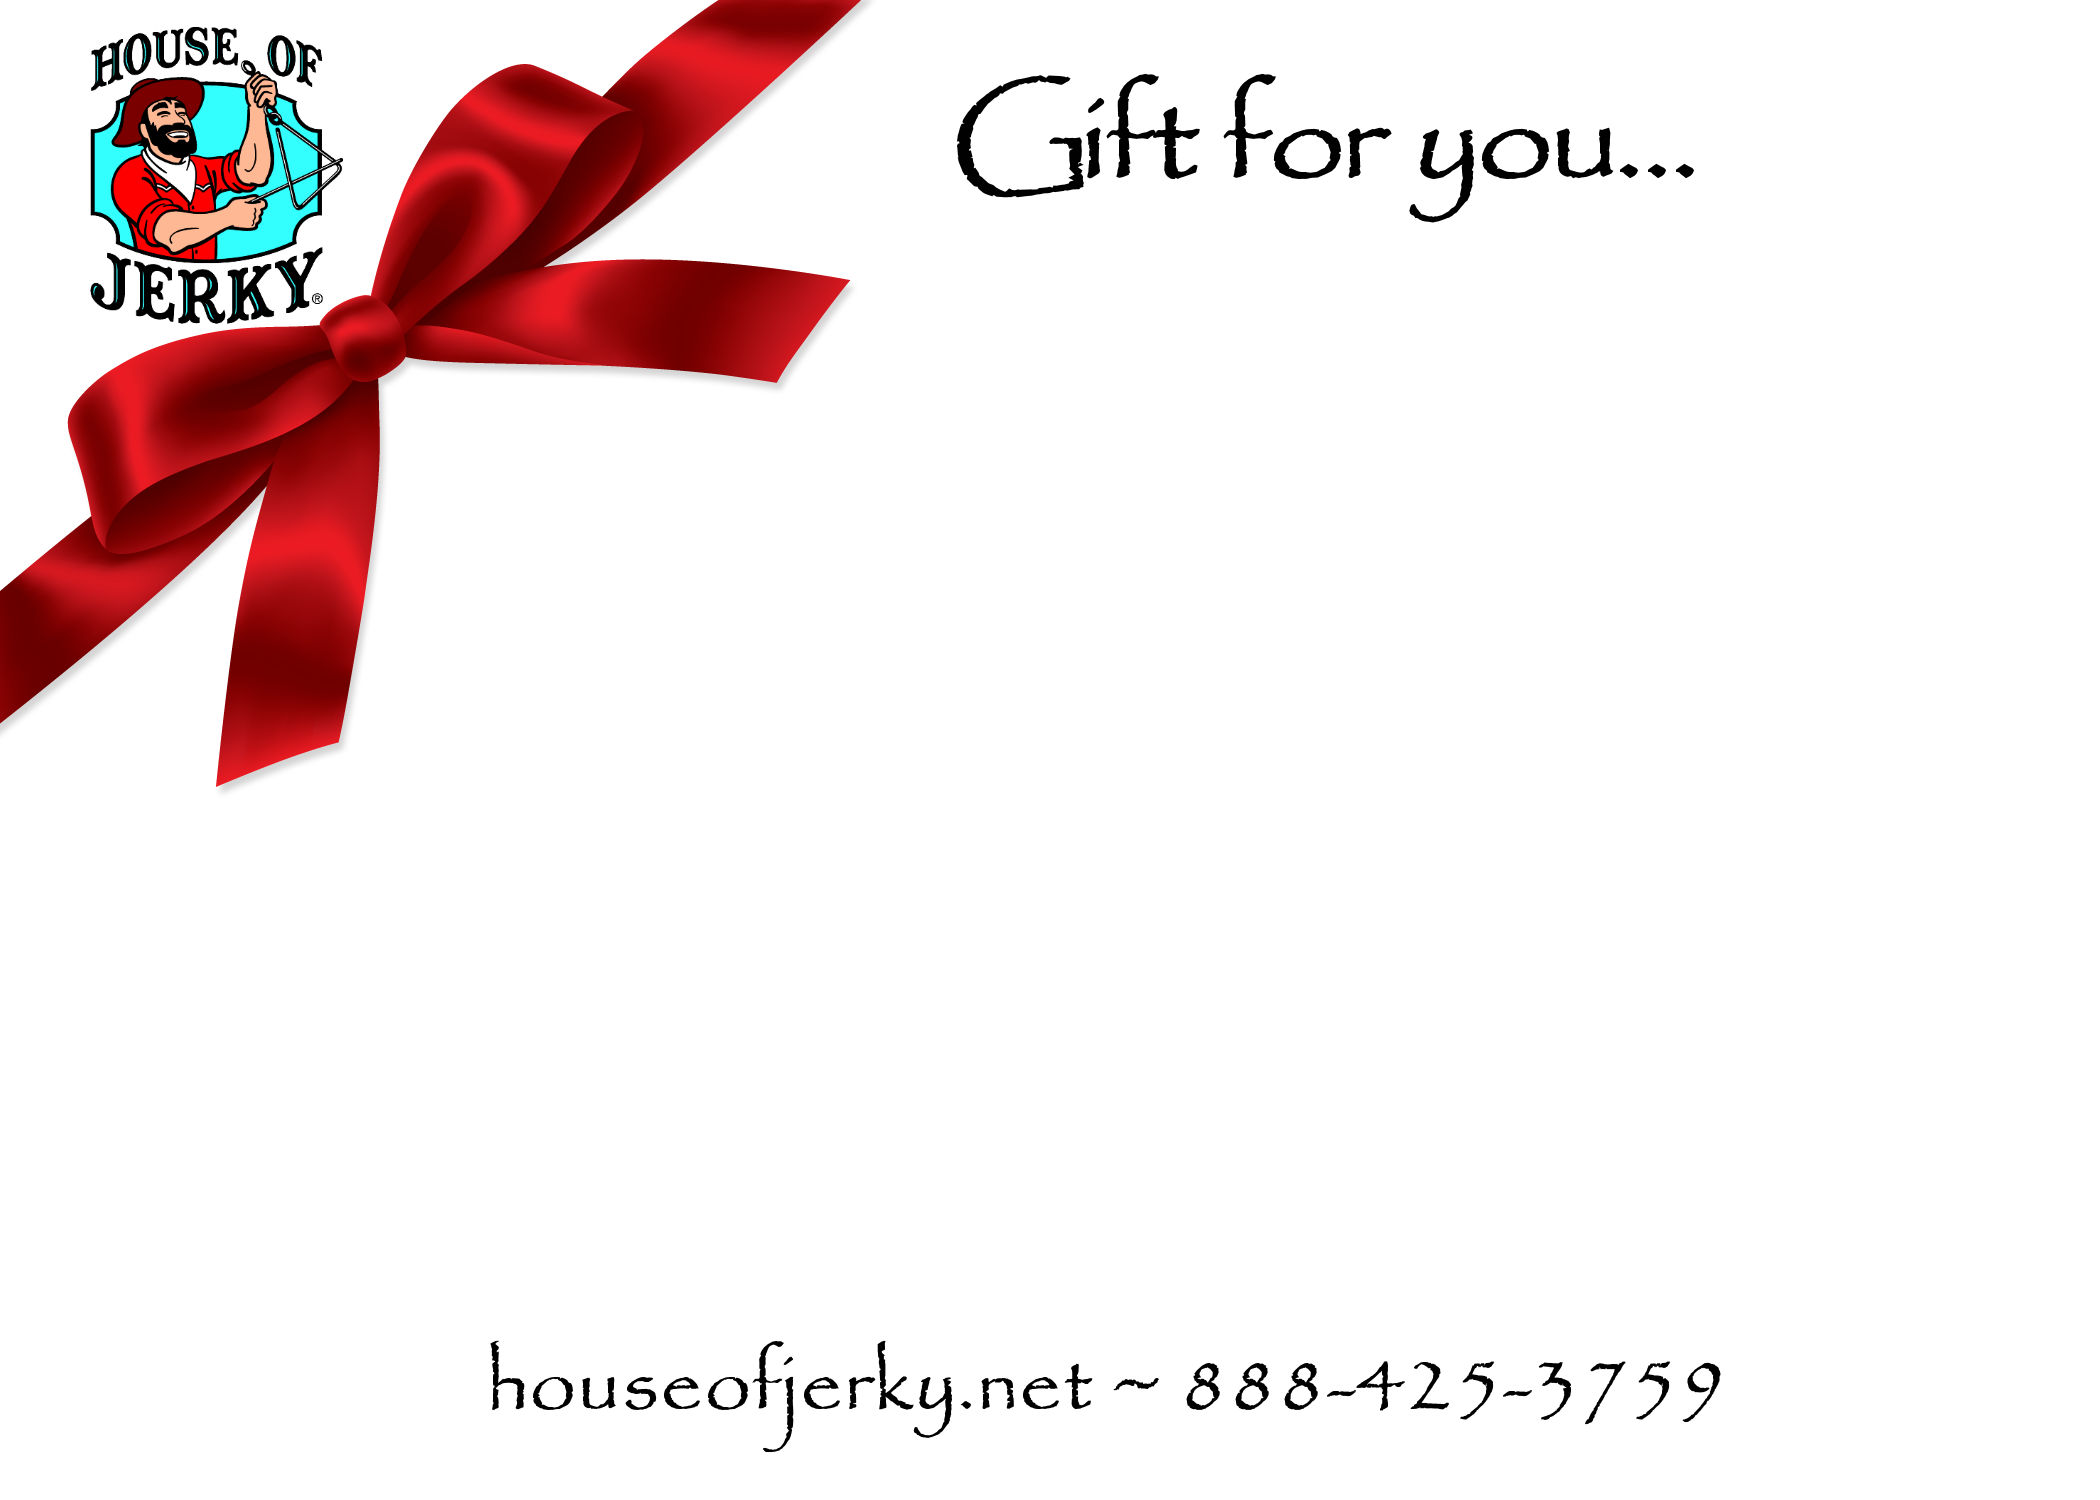 Gift card - Red Ribbon - House of Jerky